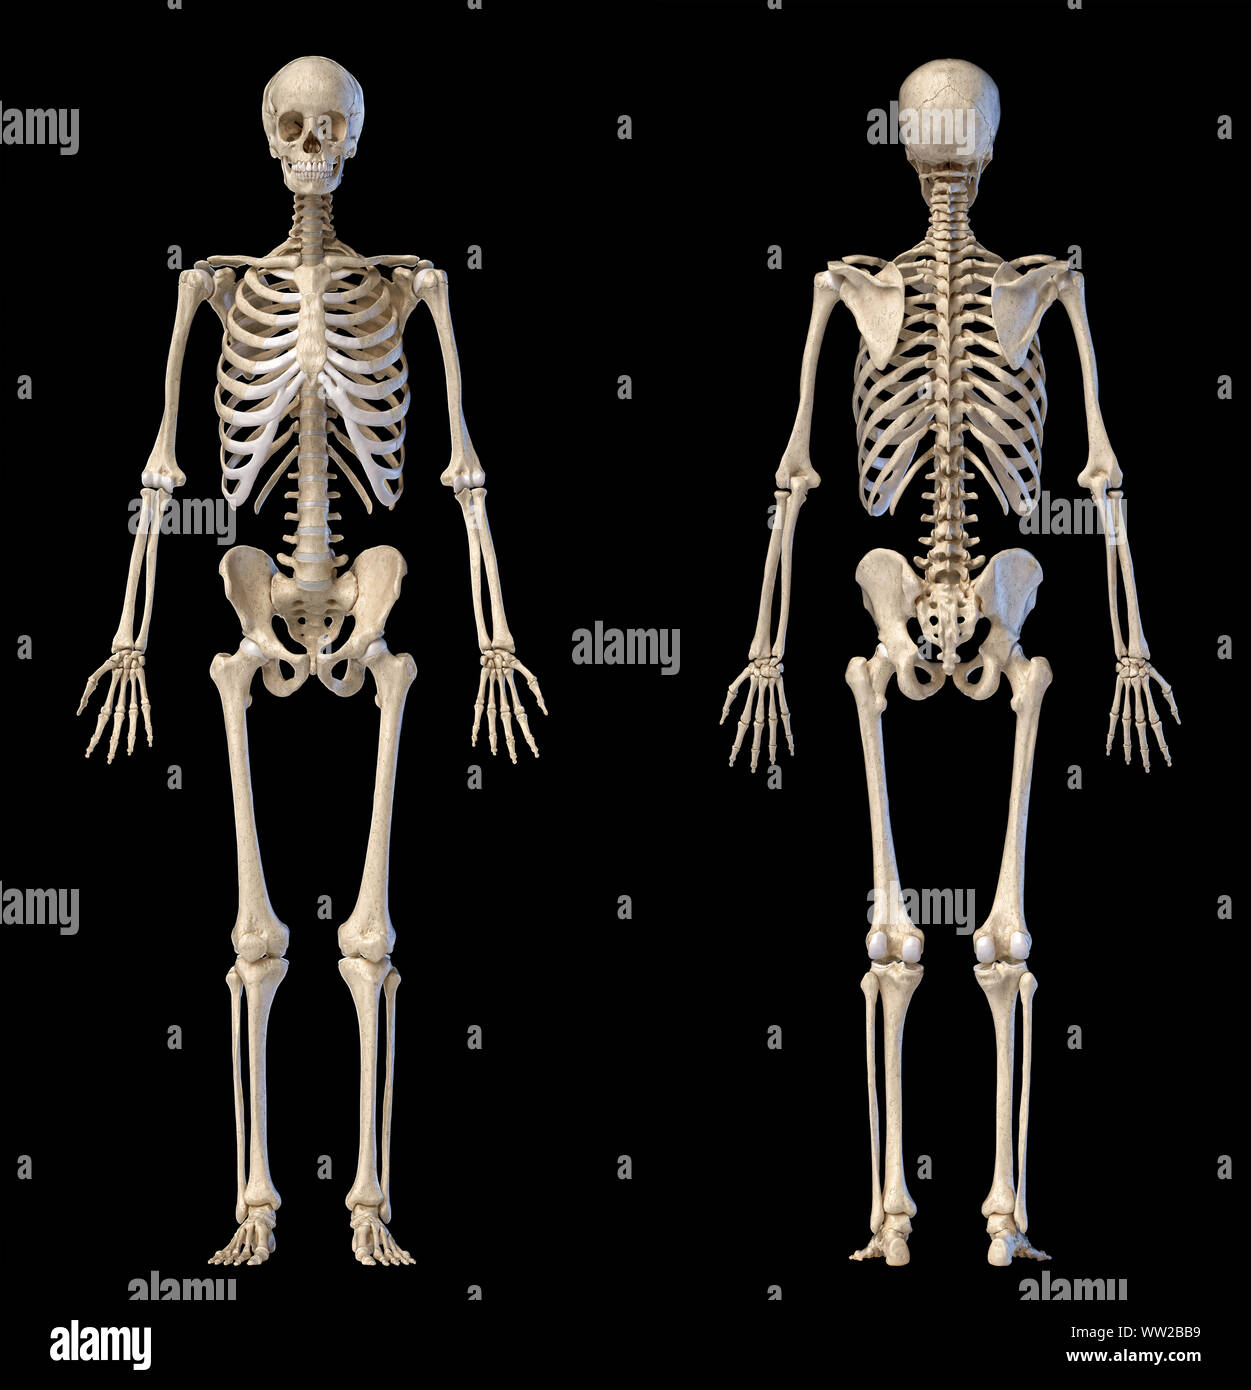 Human Anatomy full body male skeleton. Front and rear views on black background. 3d illustration. Stock Photo